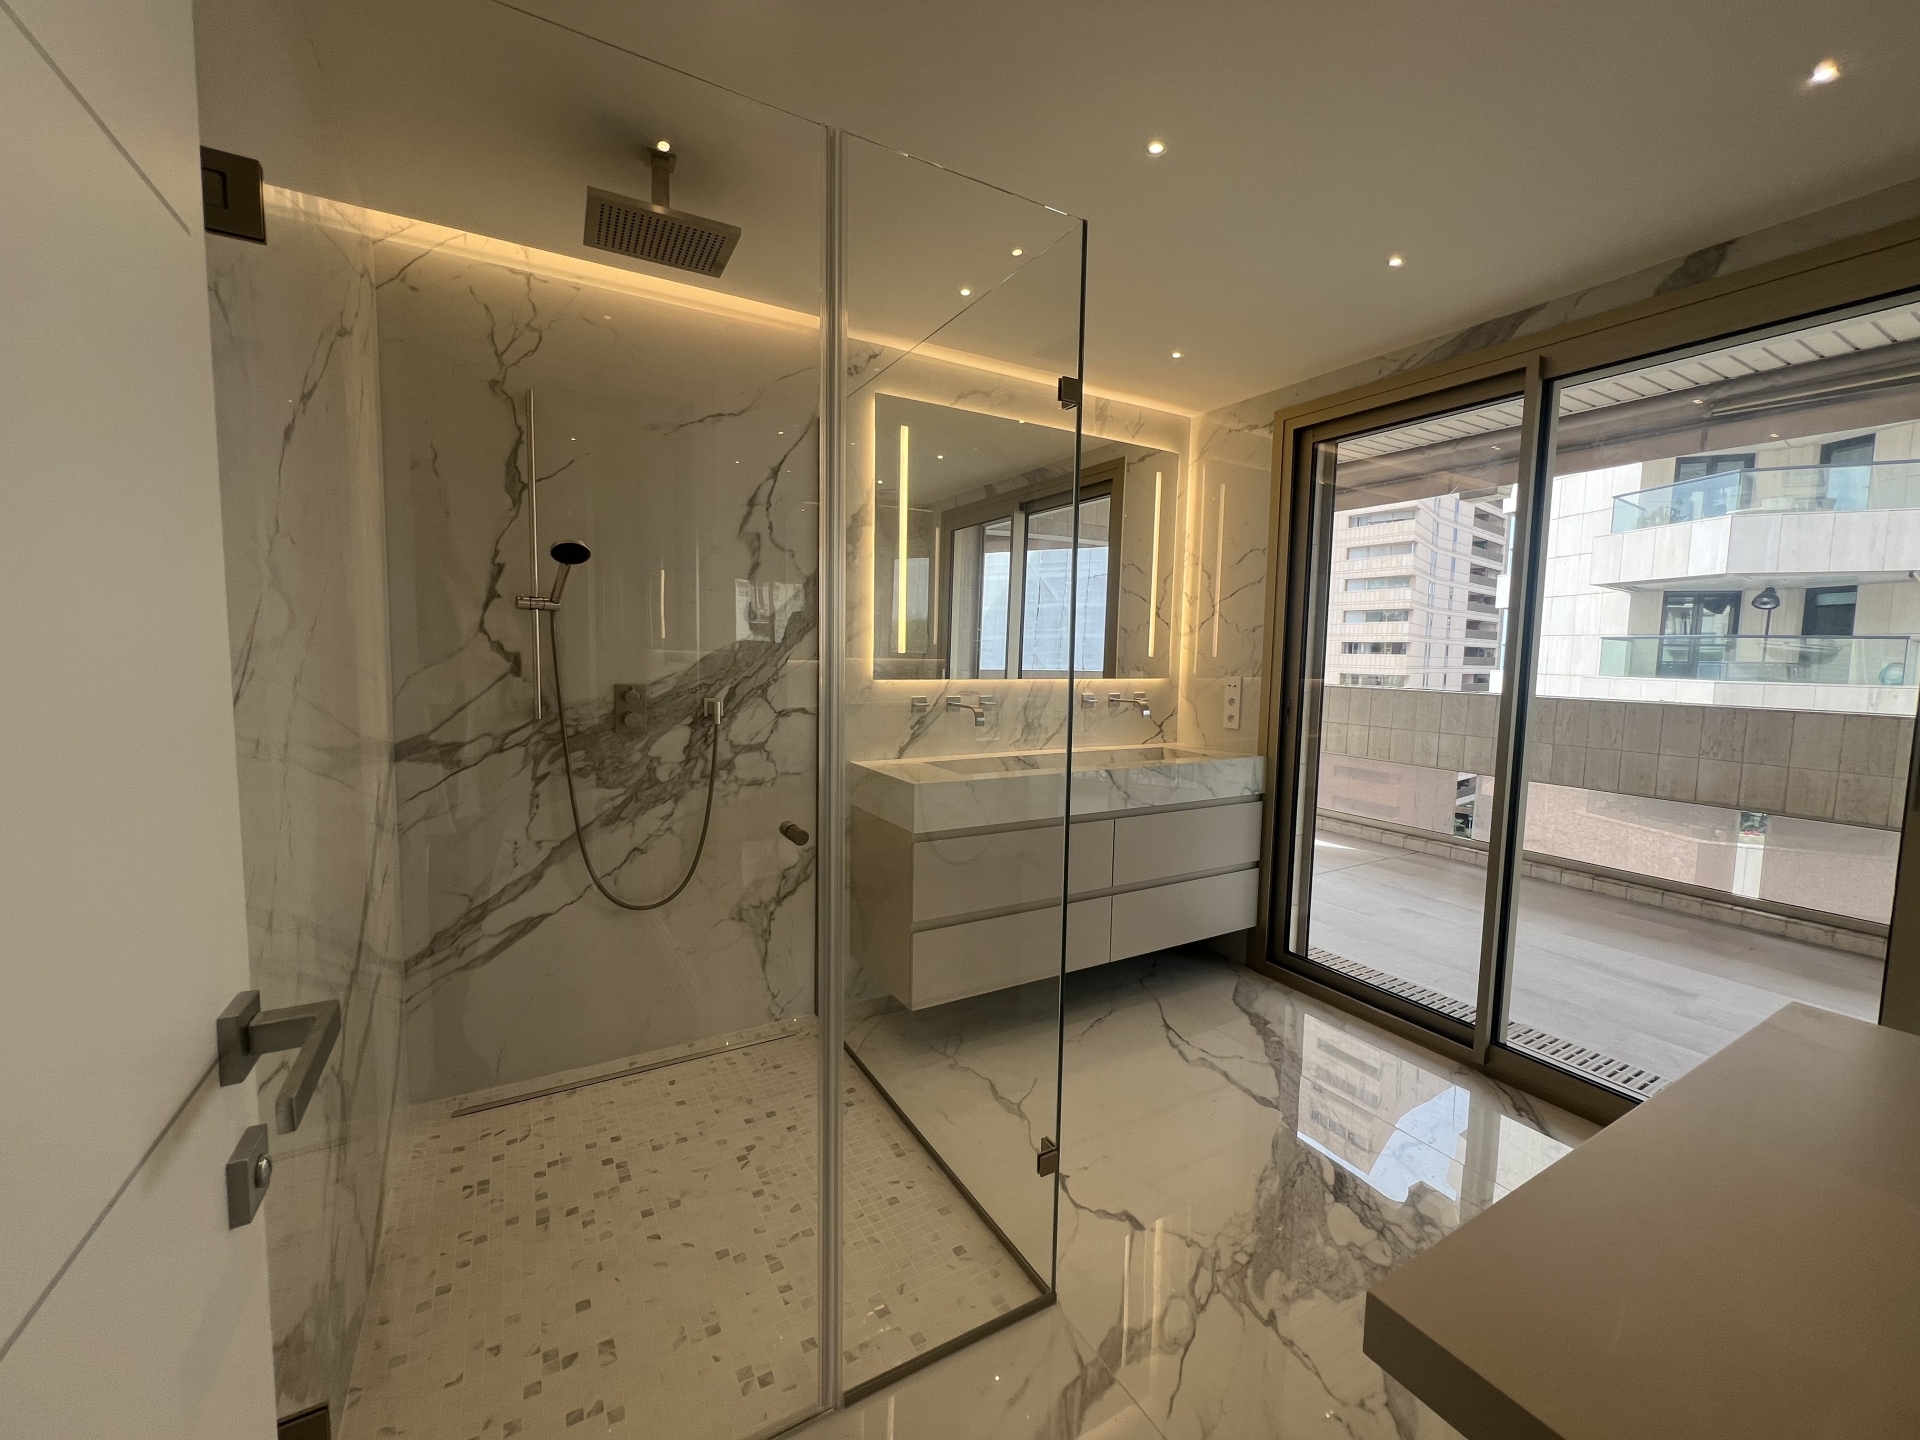 Dotta 5 rooms apartment for rent - GEORGE V - Monte-Carlo - Monaco - imgimage00001